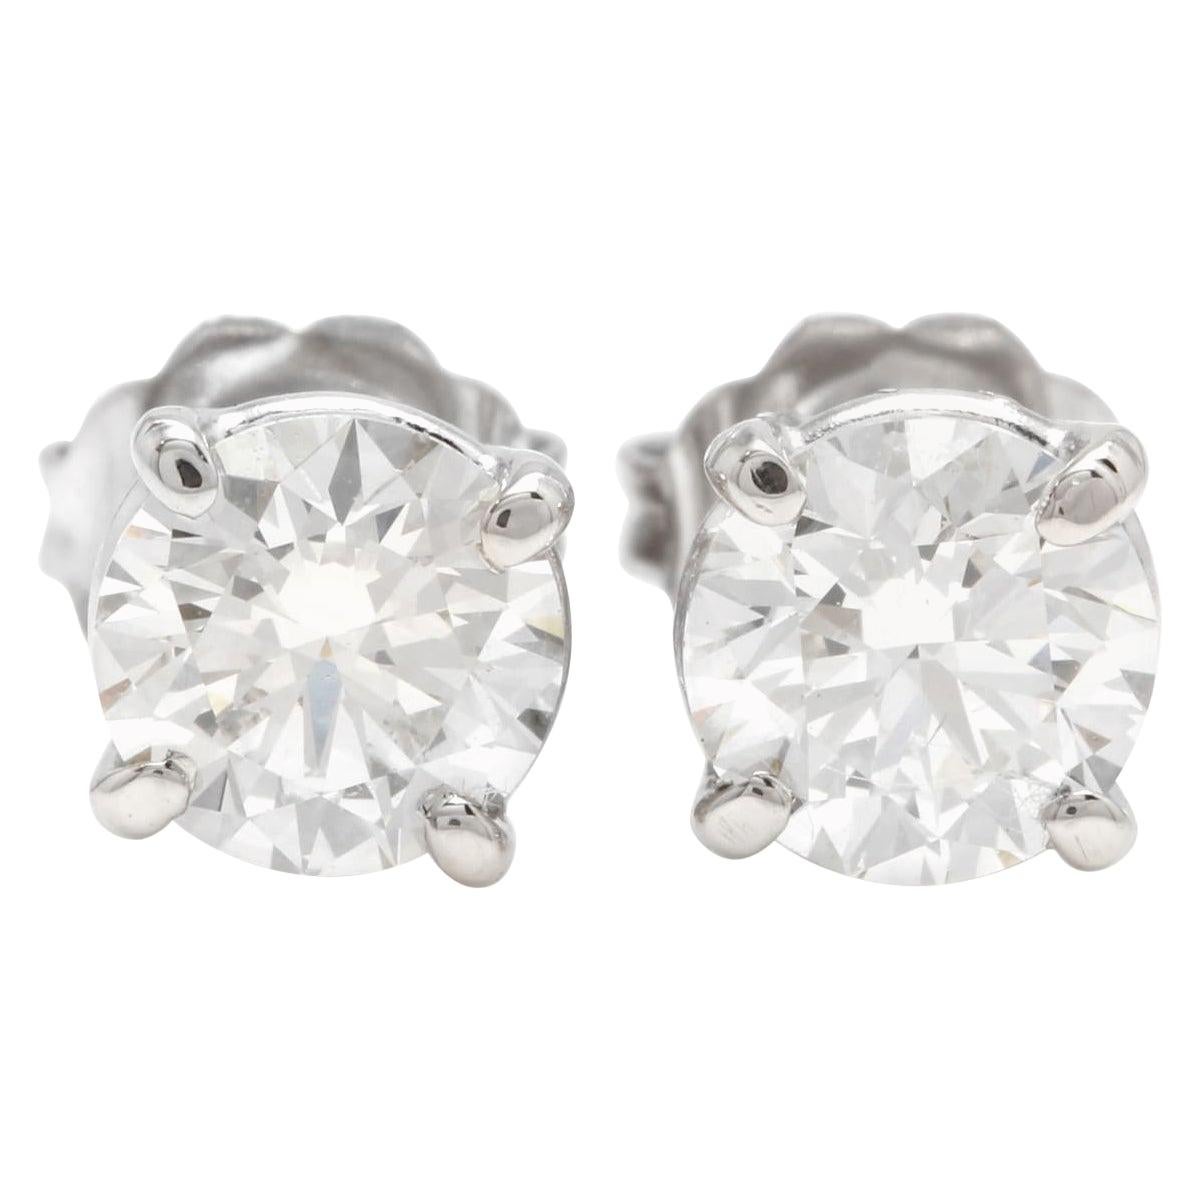 Exquisite 1.60 Carat Natural Diamond 14 Karat Solid White Gold Stud Earrings For Sale